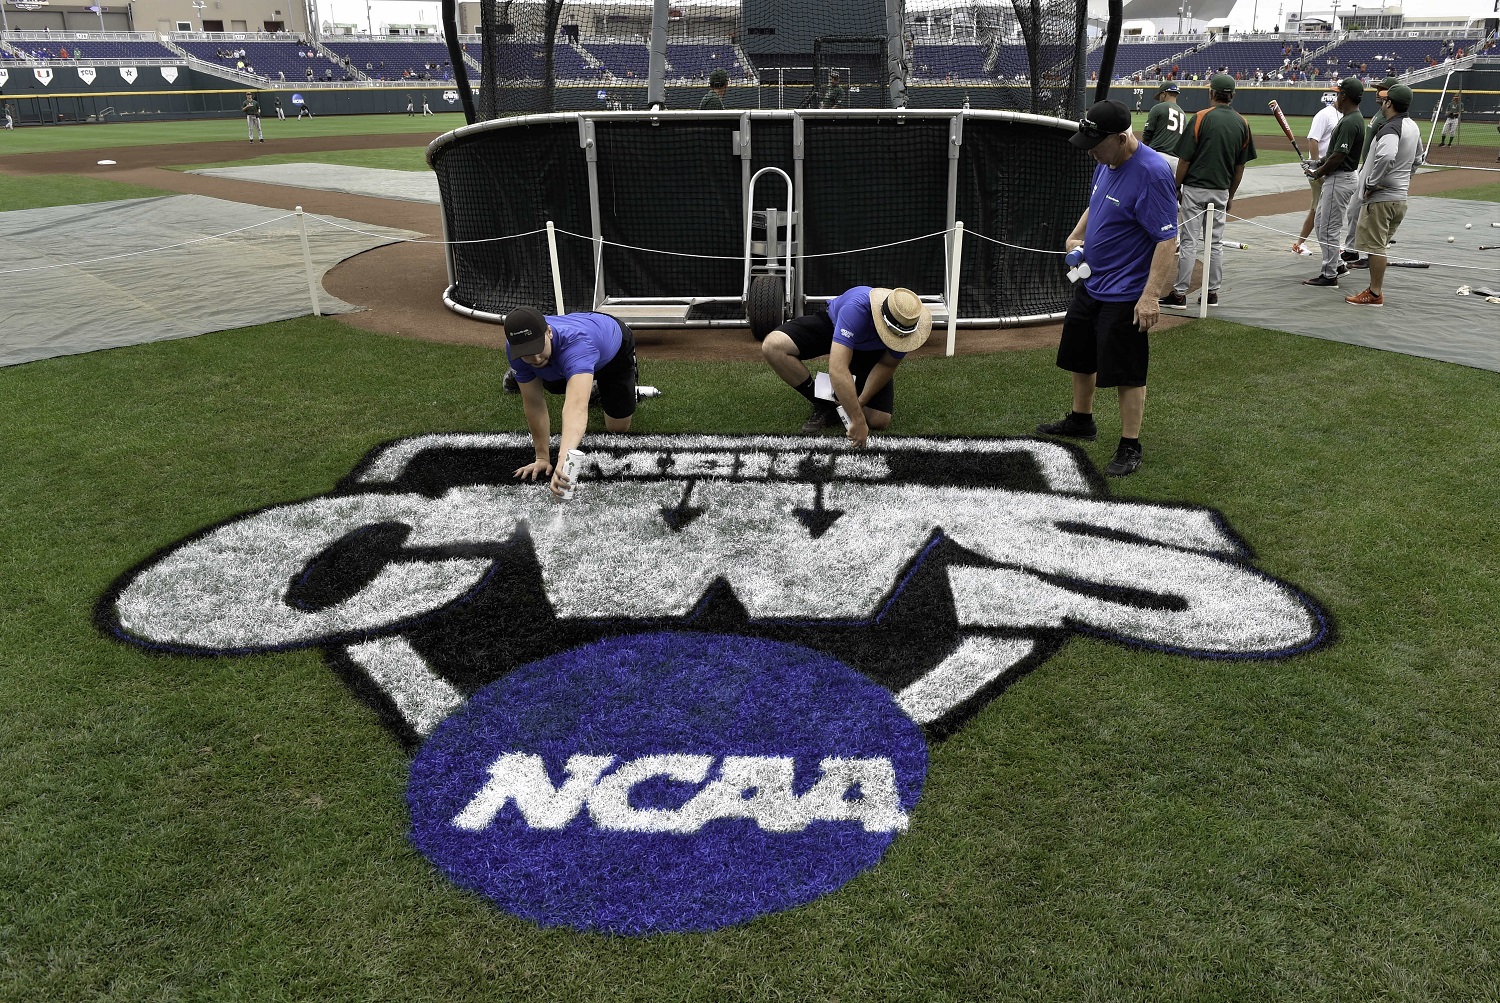 Groundskeepers paint the College World Series logo as Miami players practice at TD Ameritrade Park in Omaha, Neb., Friday, June 12, 2015. The NCAA College World Series baseball tournament starts on Saturday. (AP Photo/Mike Theiler)